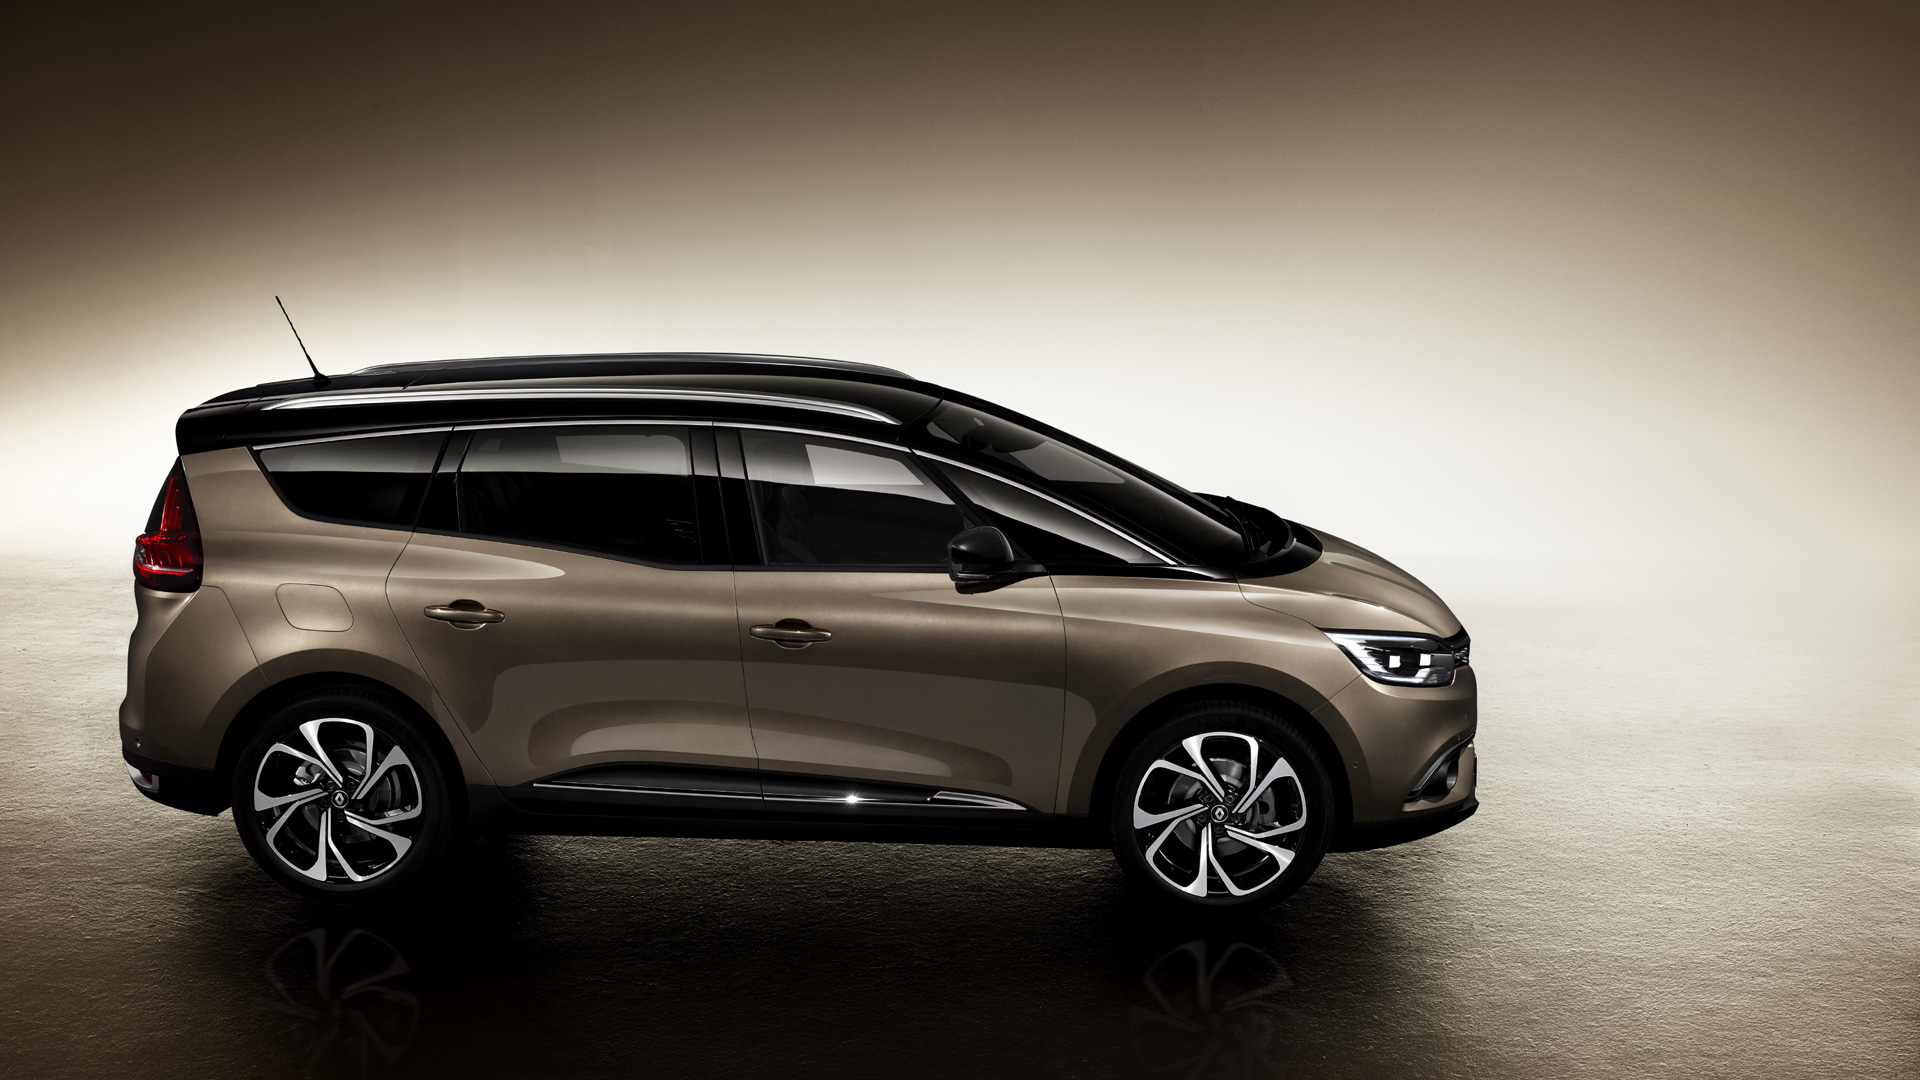 2016 Renault Grand Scenic side view